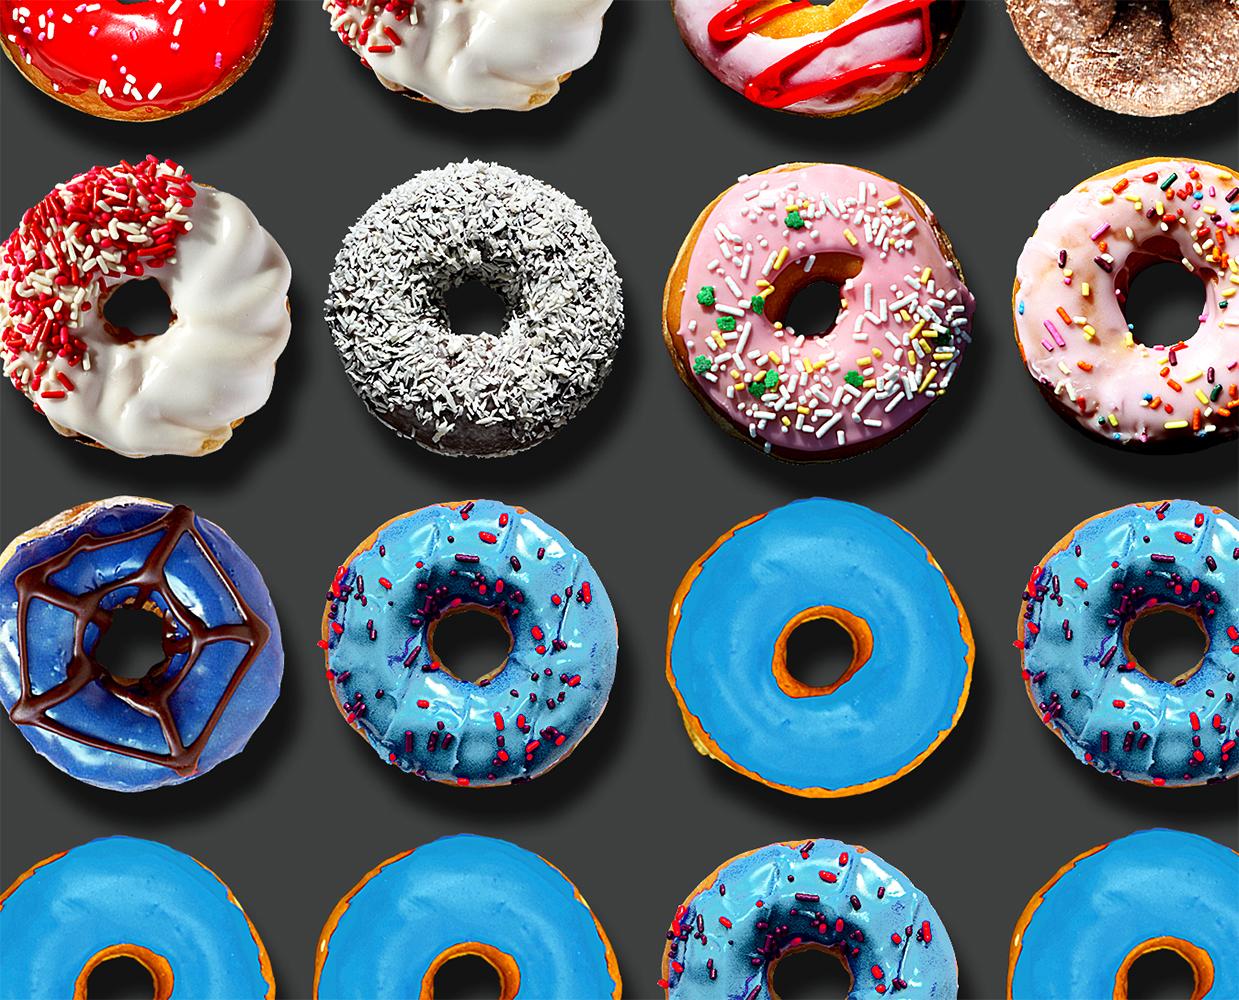 Large Superman Donuts, 60x48, One of a kind Photo arrangement of Donuts - Photograph by Candice CMC